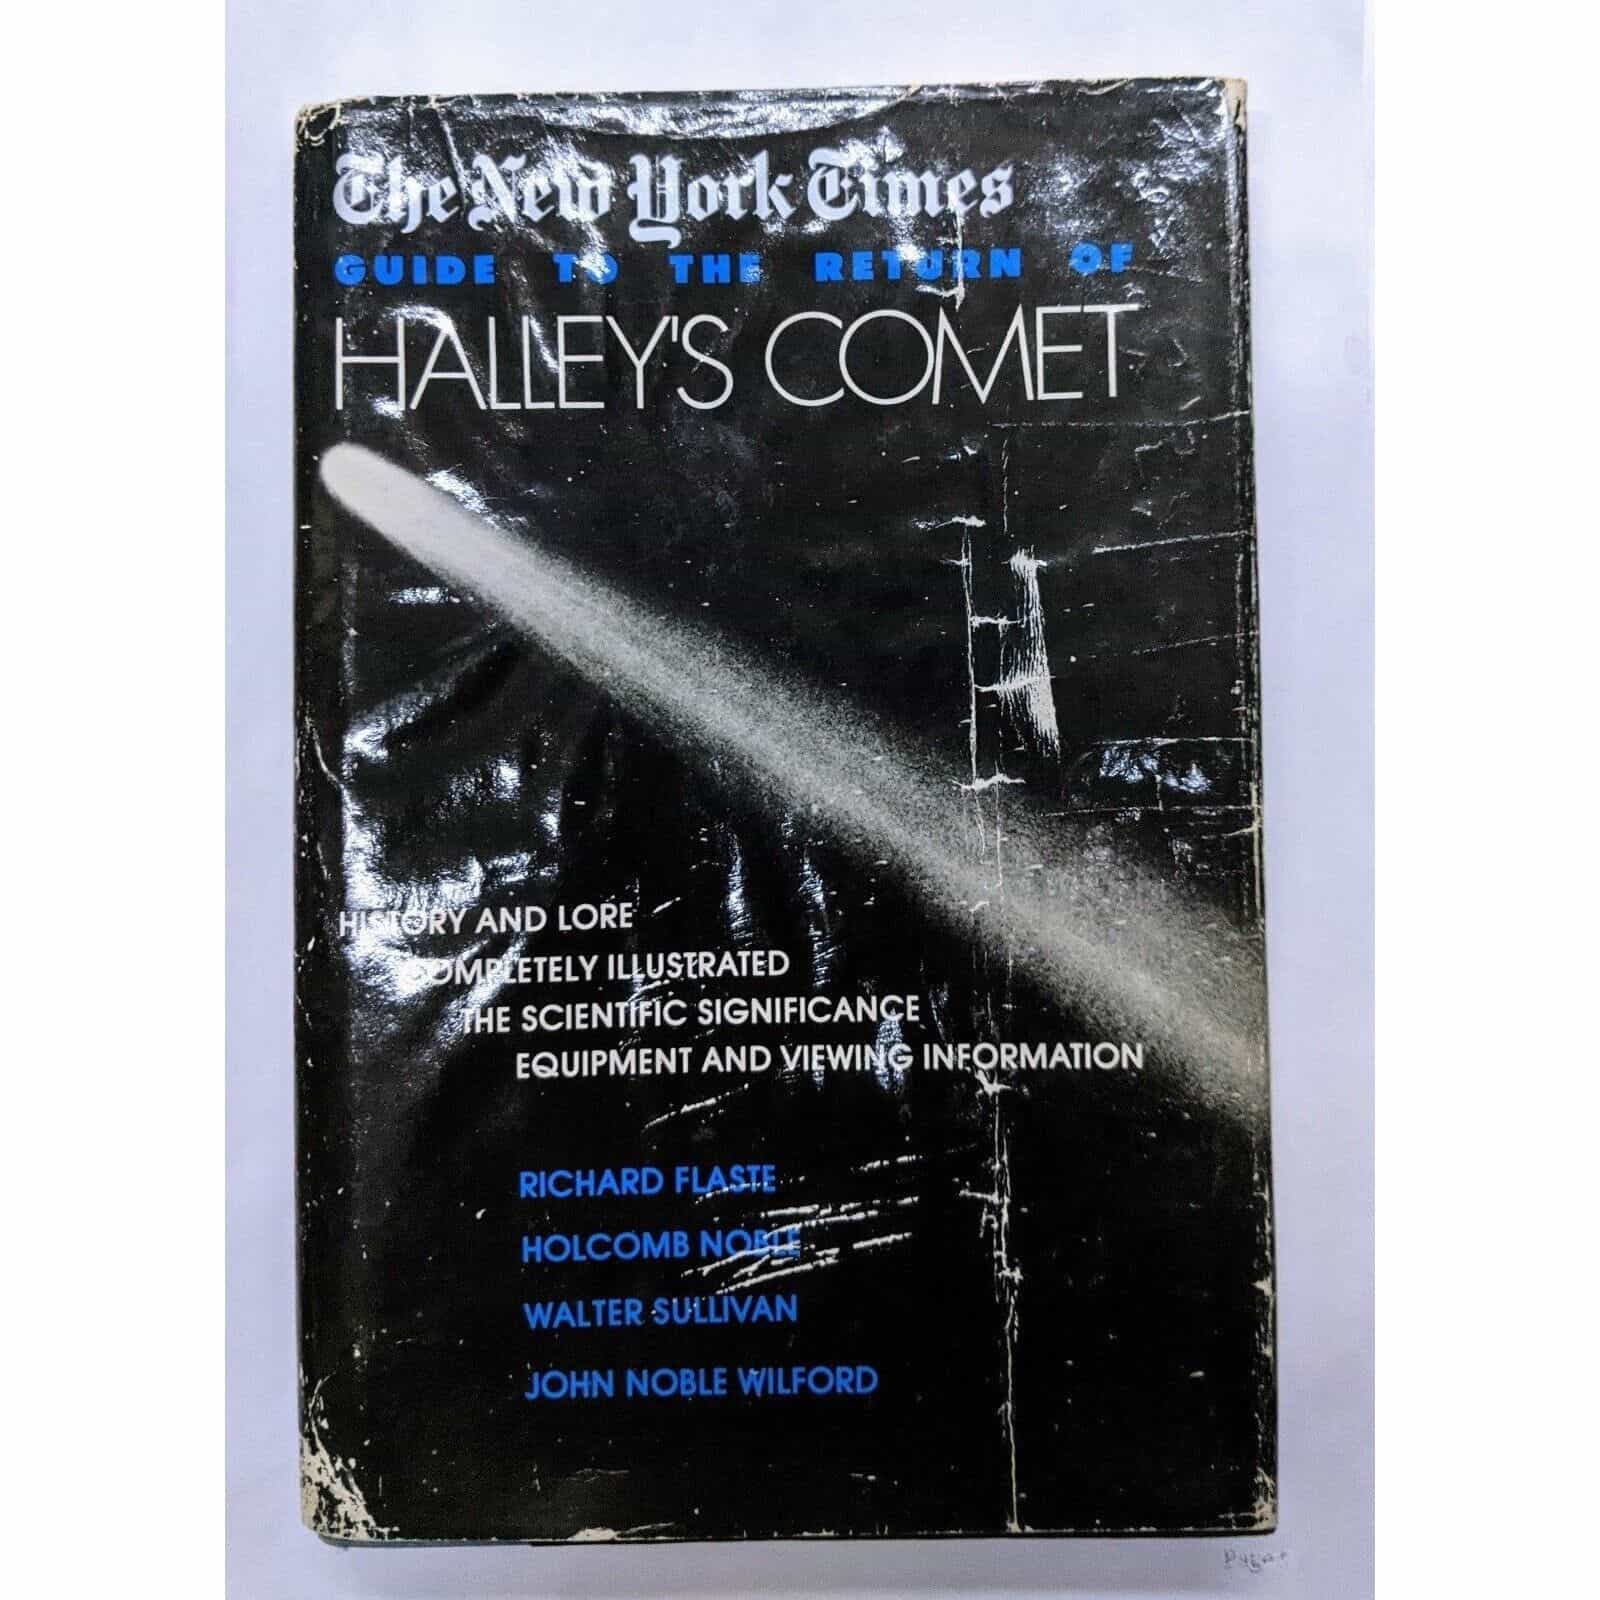 Guide To The Return of Halley’s Comet by Richard Flaste Book